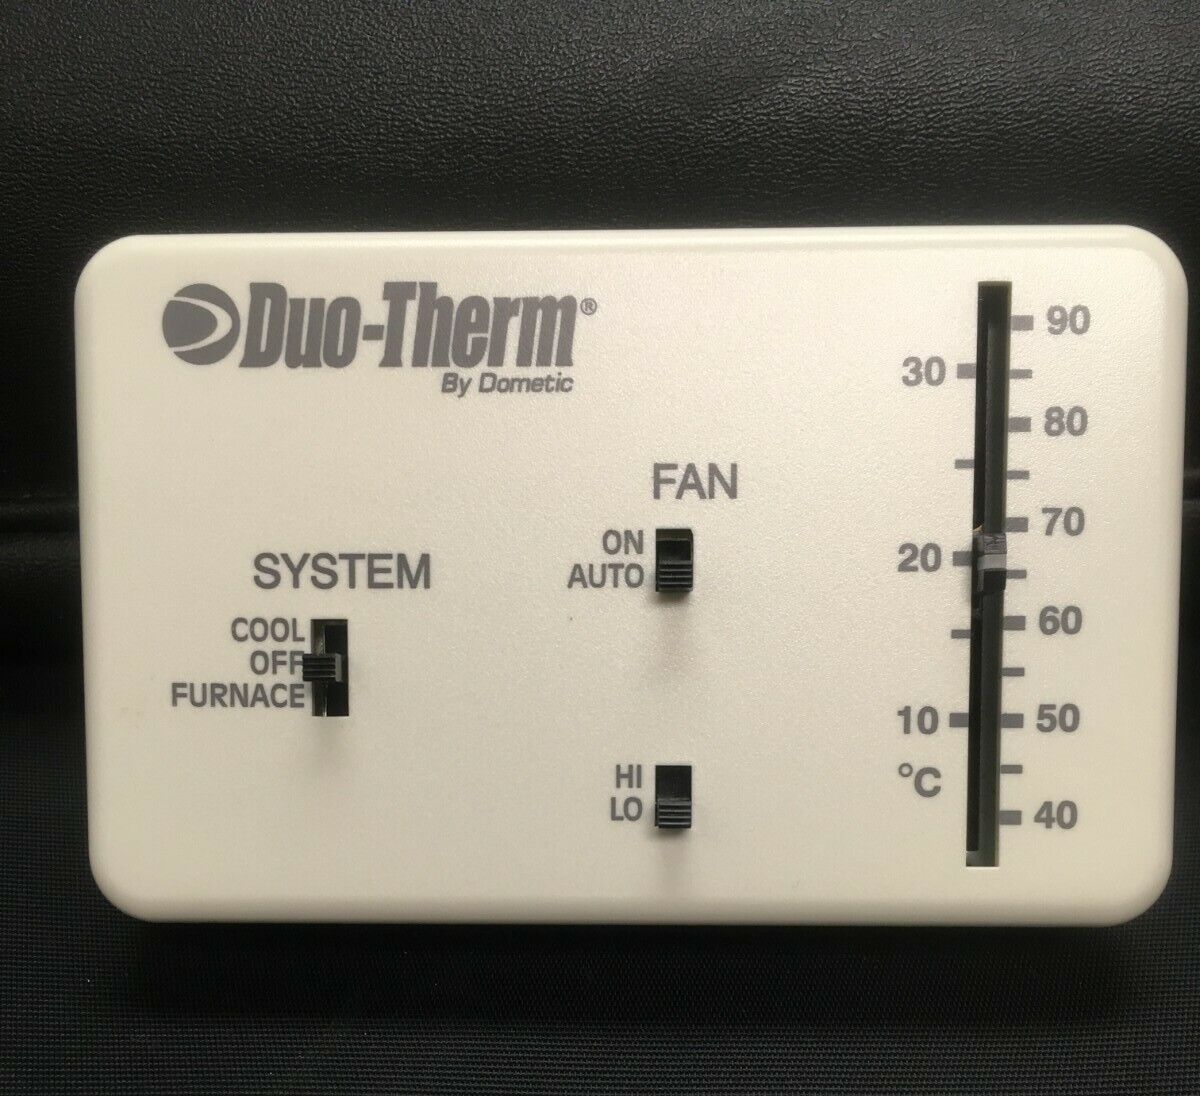 Dometic DuoTherm Heat/Cool Thermostat Analog 3106995.032 FREE SHIPPING RV CAMPER 